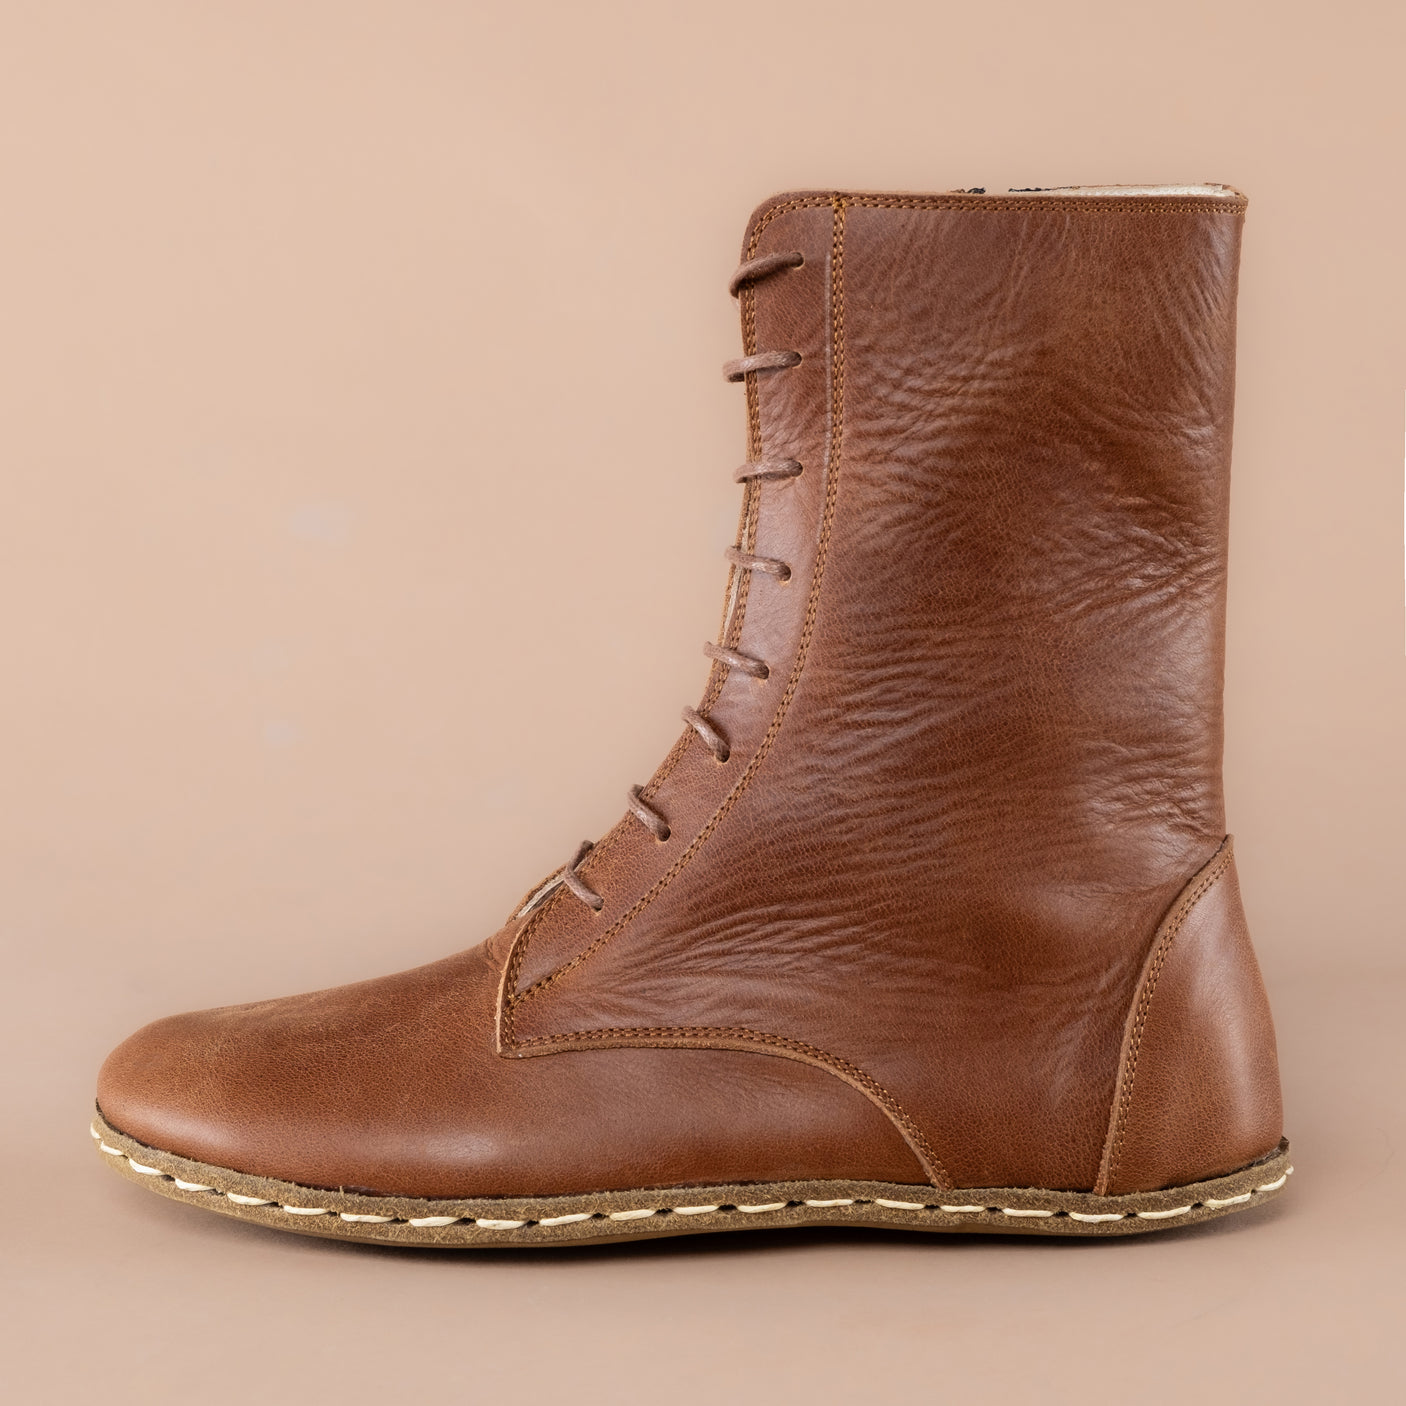 Women's Brown Barefoot High Ankle Boots